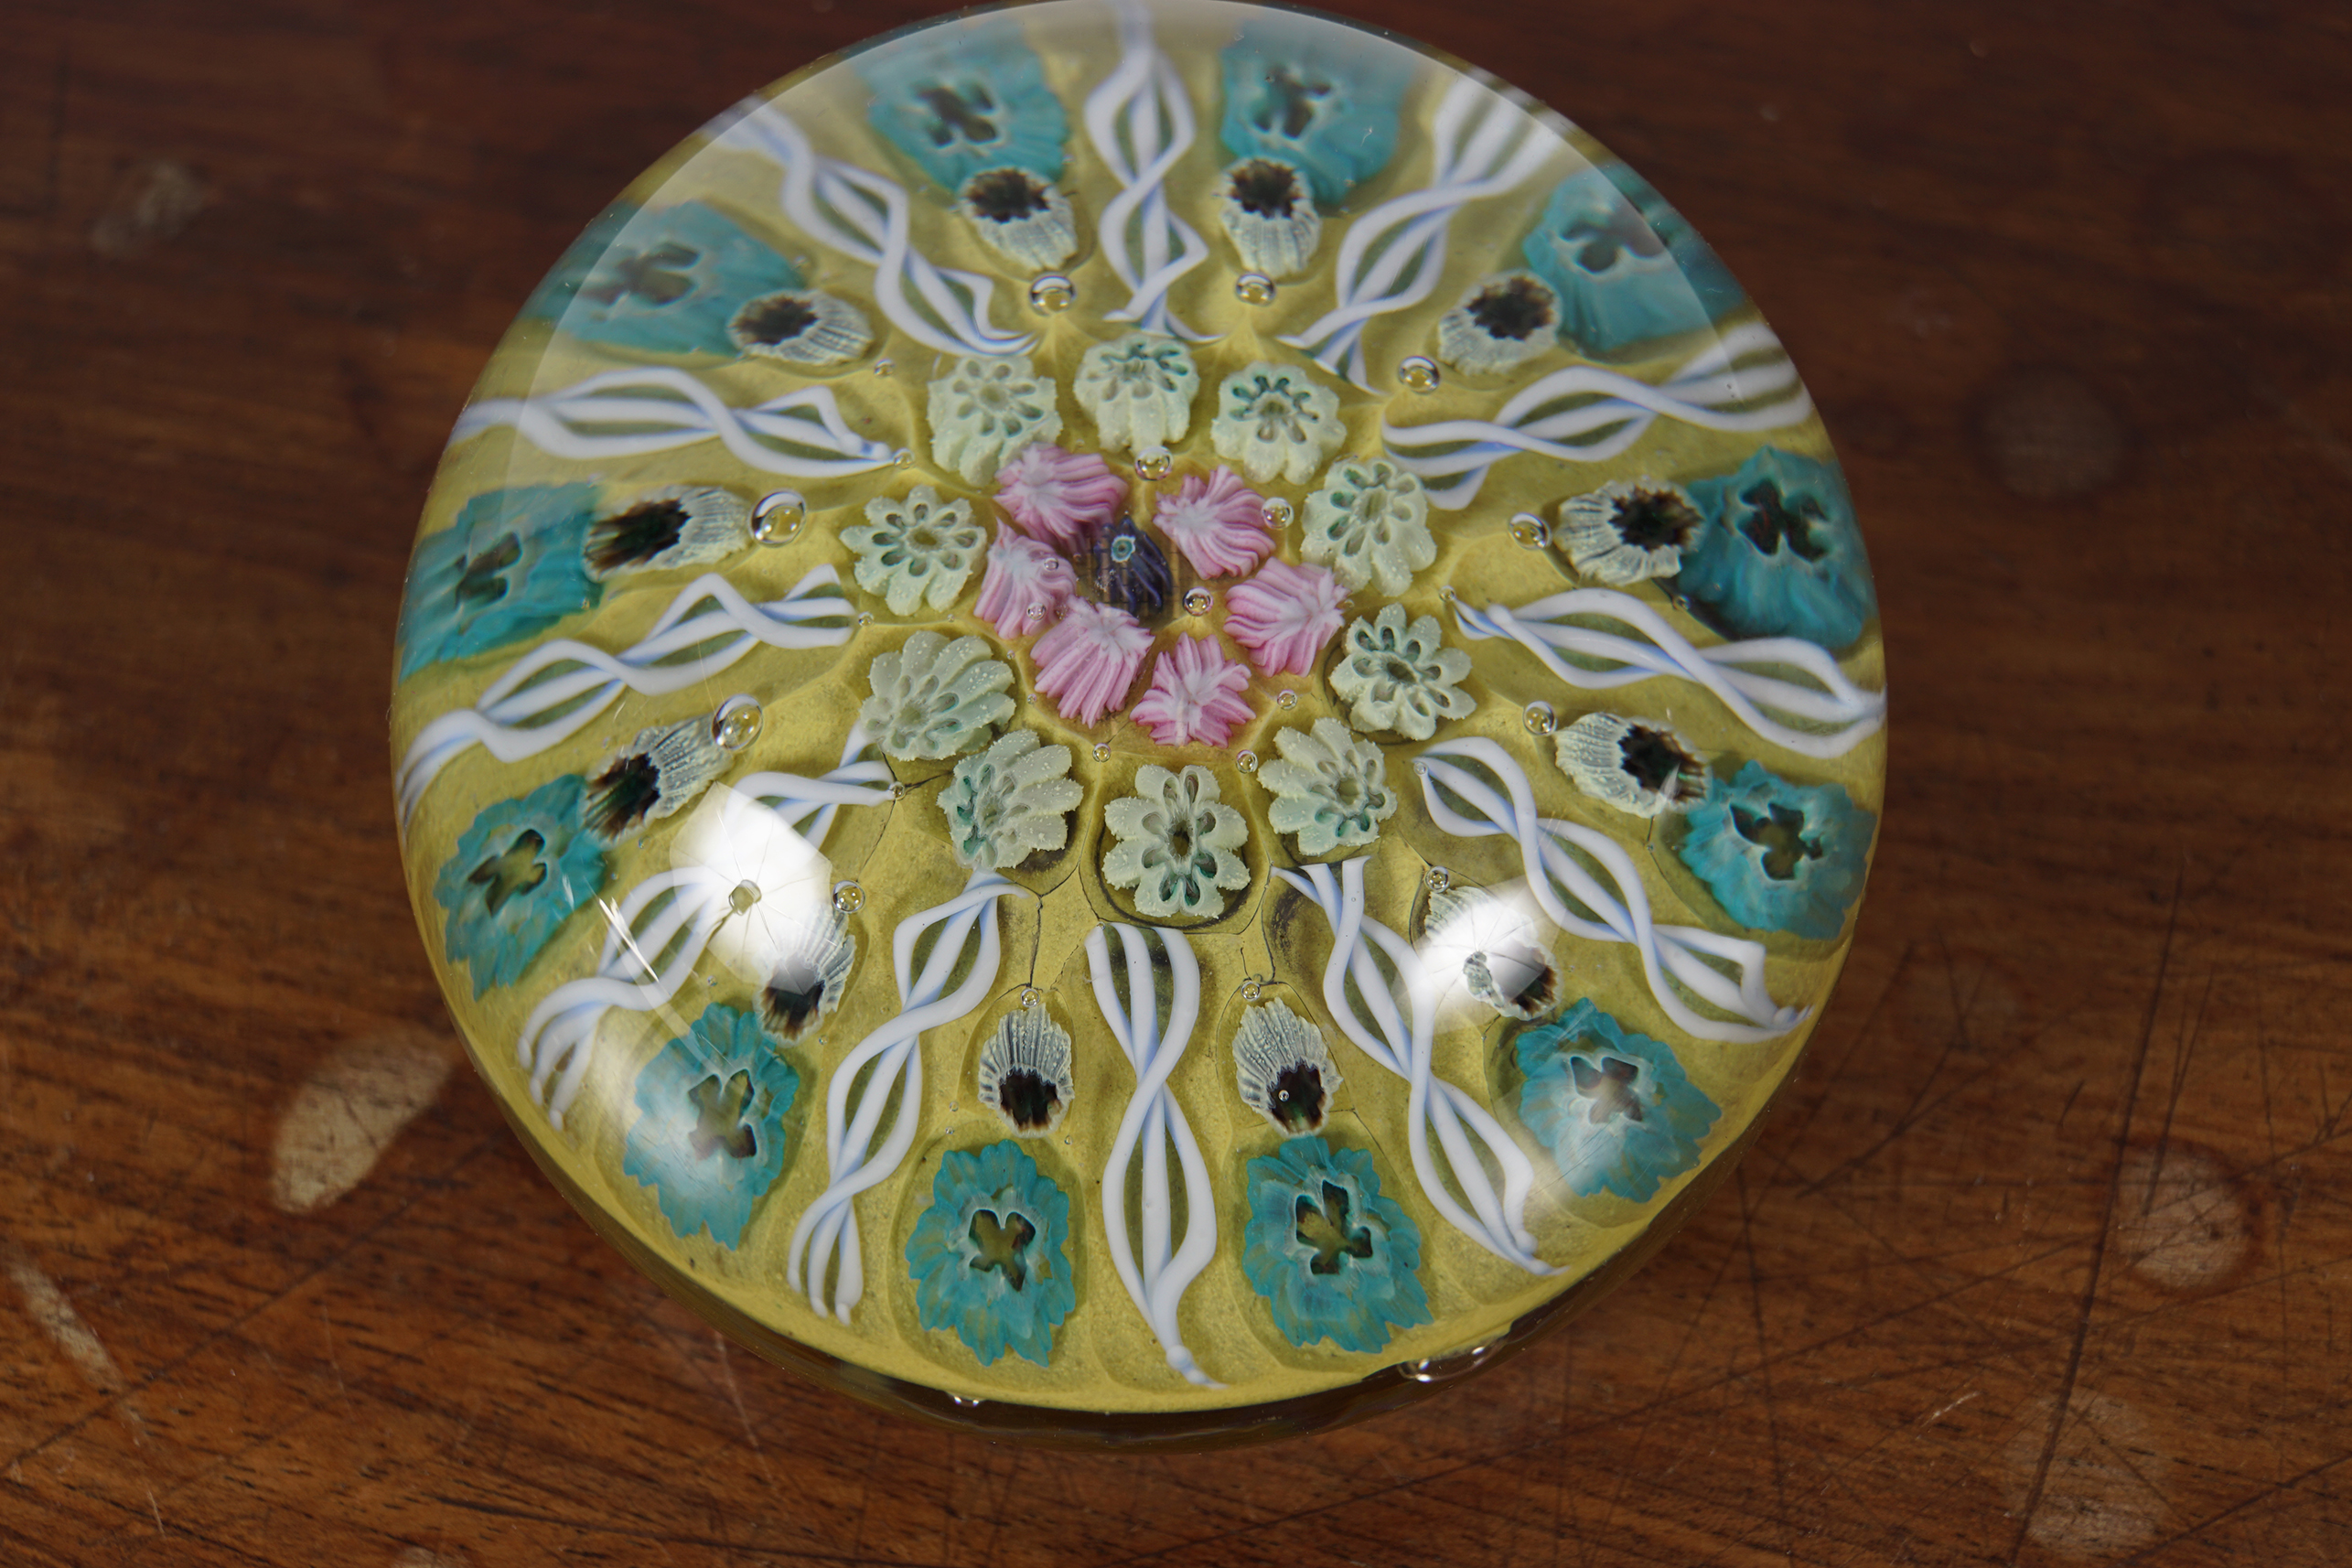 MILLE FIORI GLASS PAPERWEIGHT - Image 2 of 2